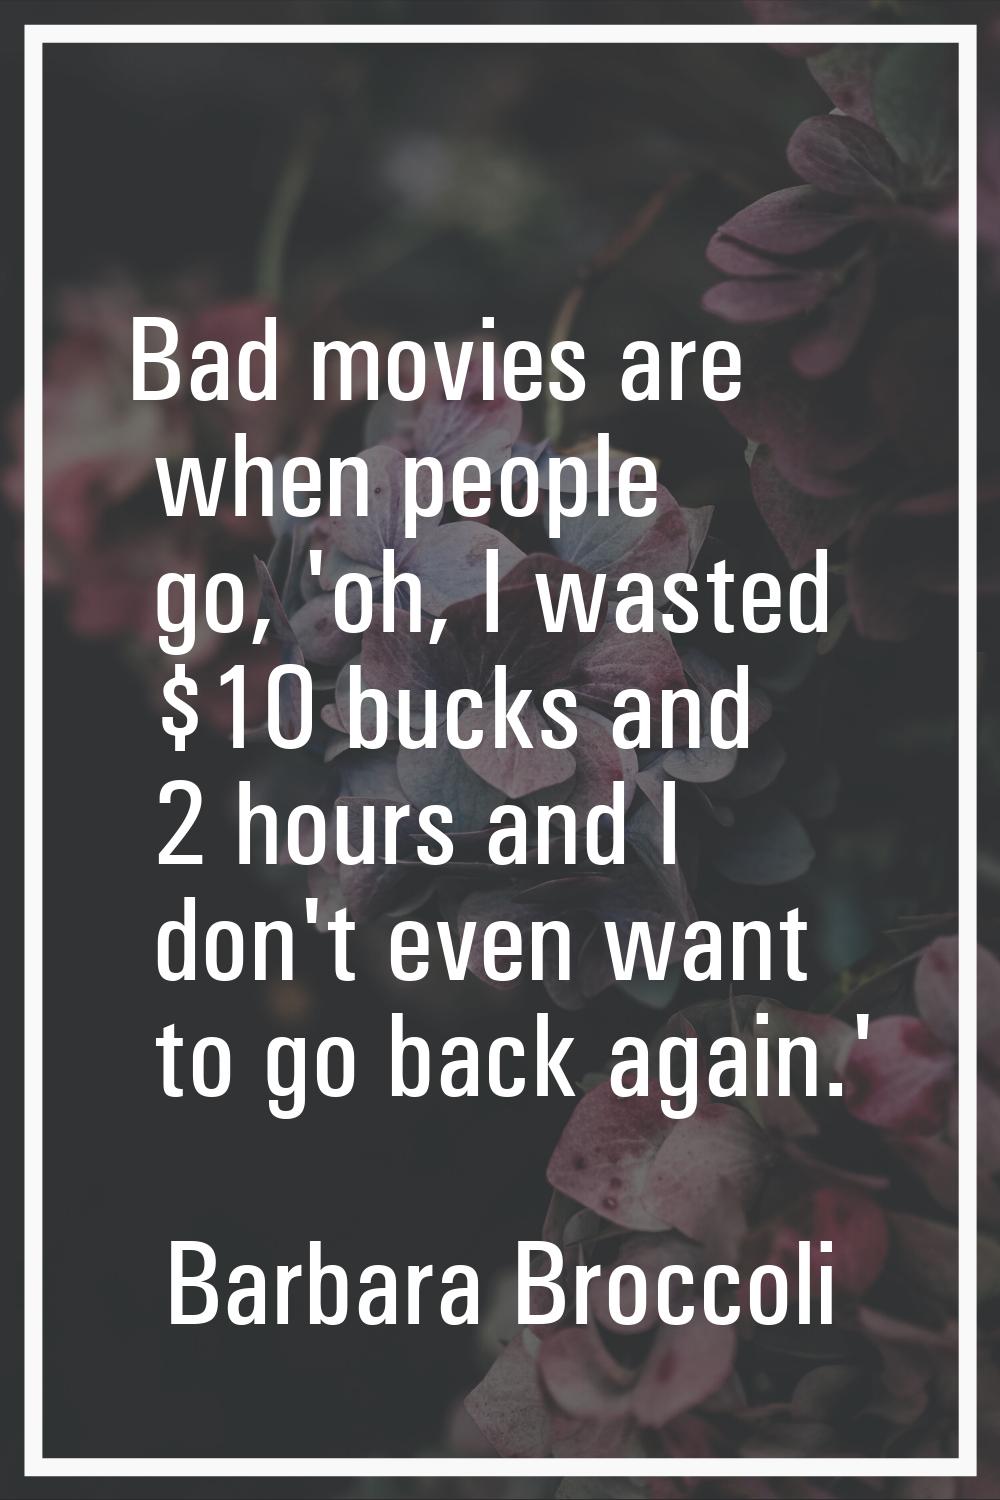 Bad movies are when people go, 'oh, I wasted $10 bucks and 2 hours and I don't even want to go back